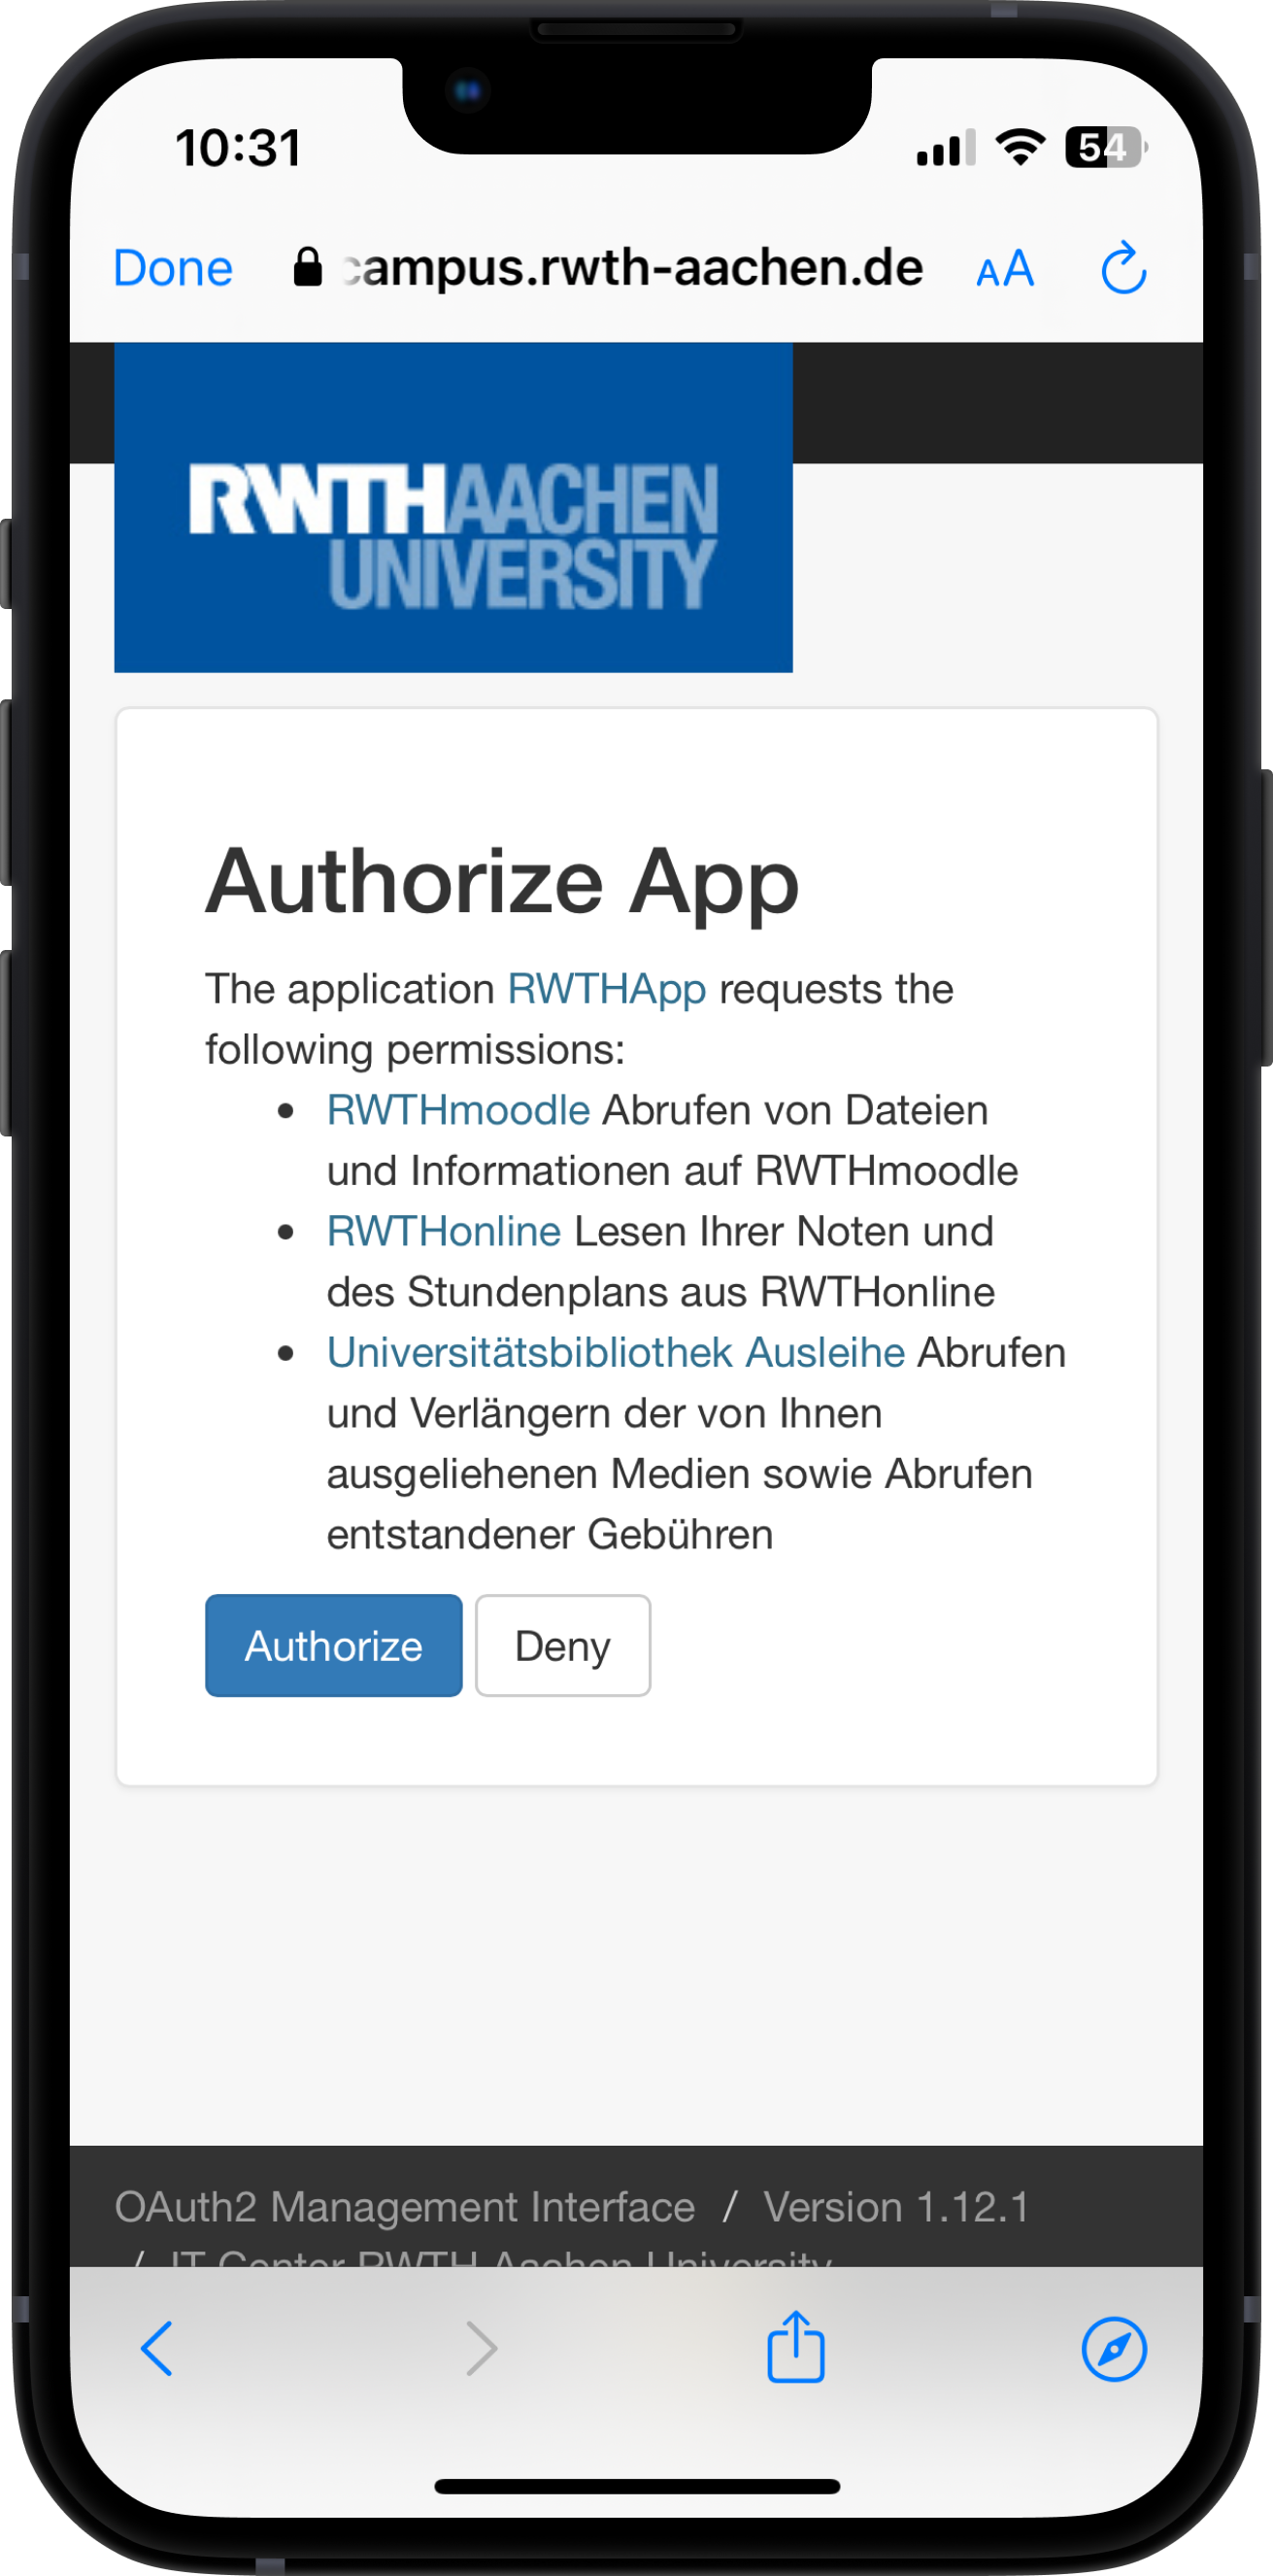 Screenshot of the permissions page. Under "Authorize App" the required permissions are listed. You can select "Authorize" or "Deny".